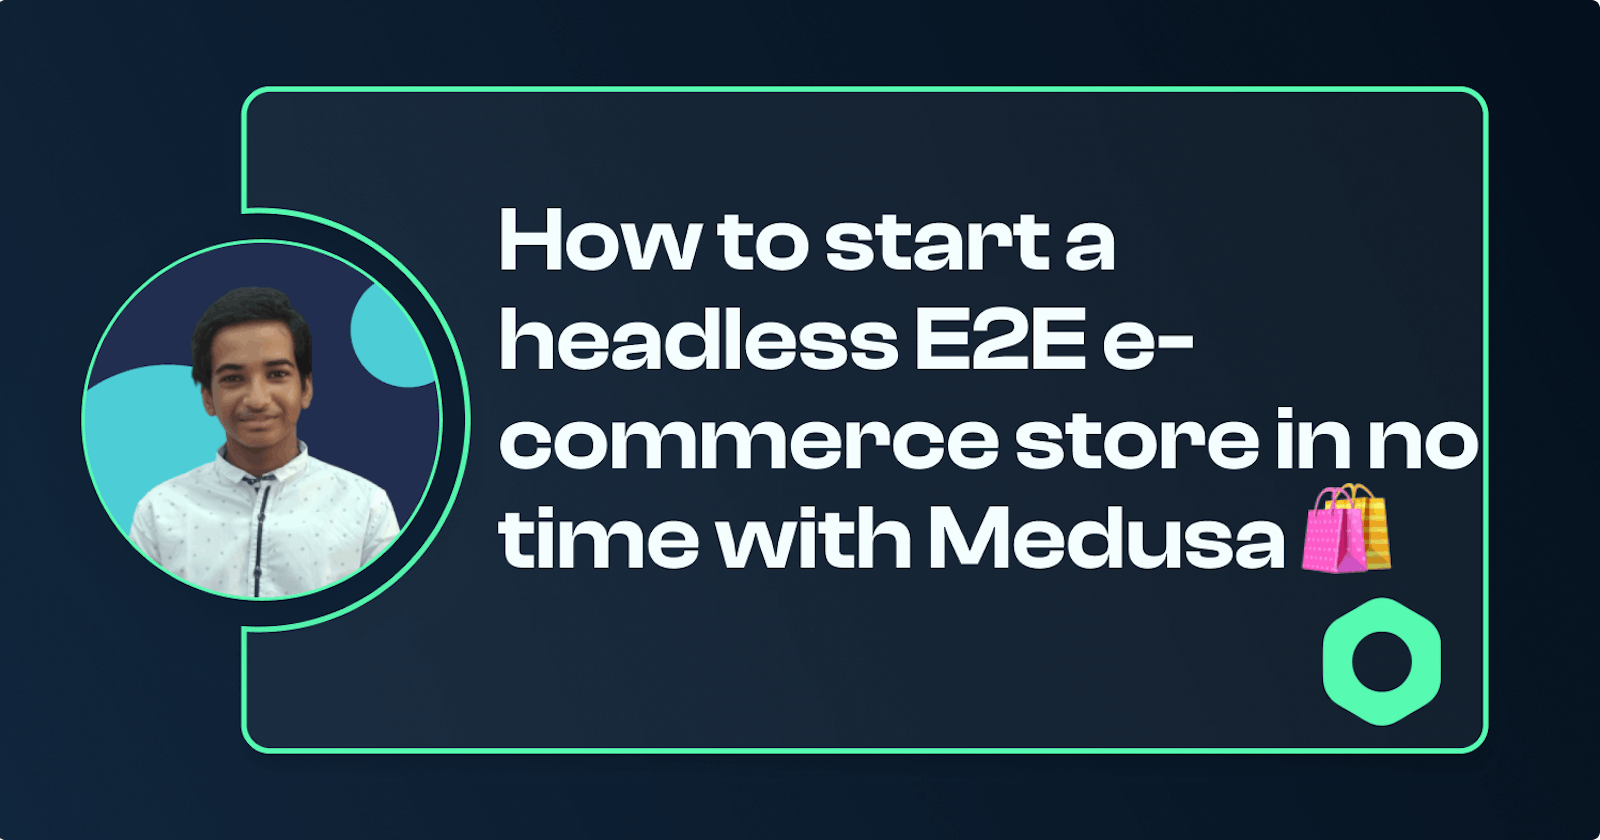 How to start a headless E2E e-commerce store in no time with Medusa 🛍️